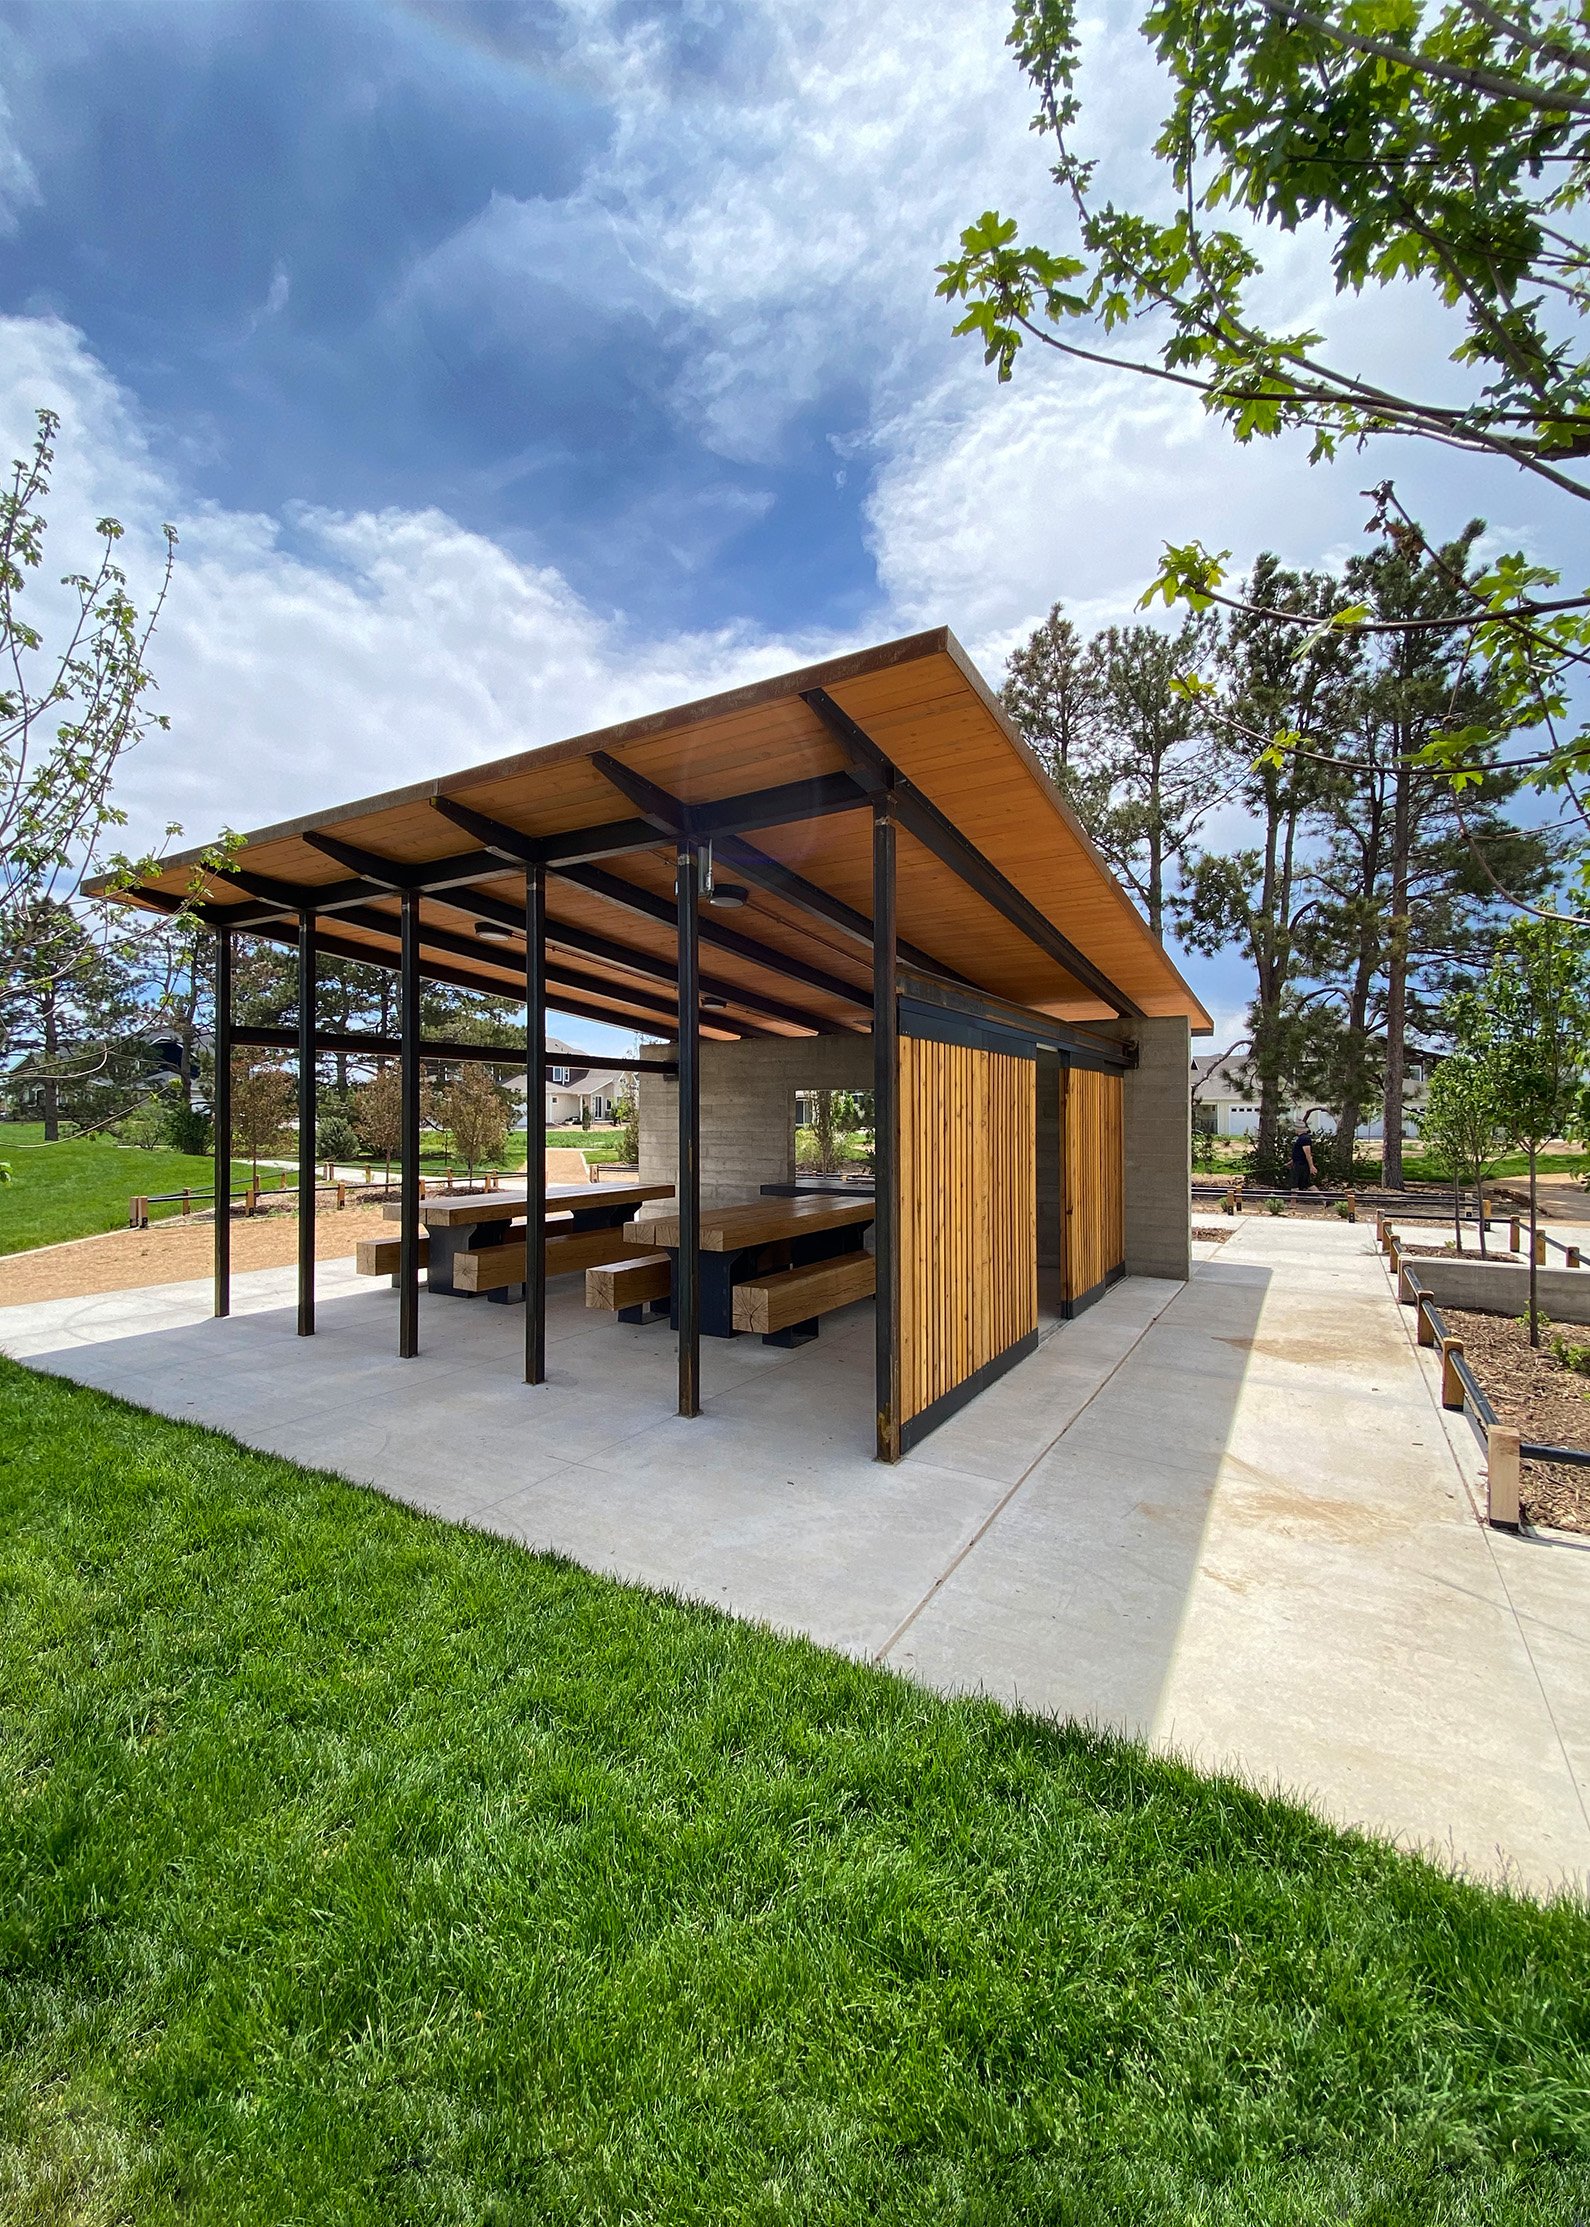 picnic shelter from NW.jpg